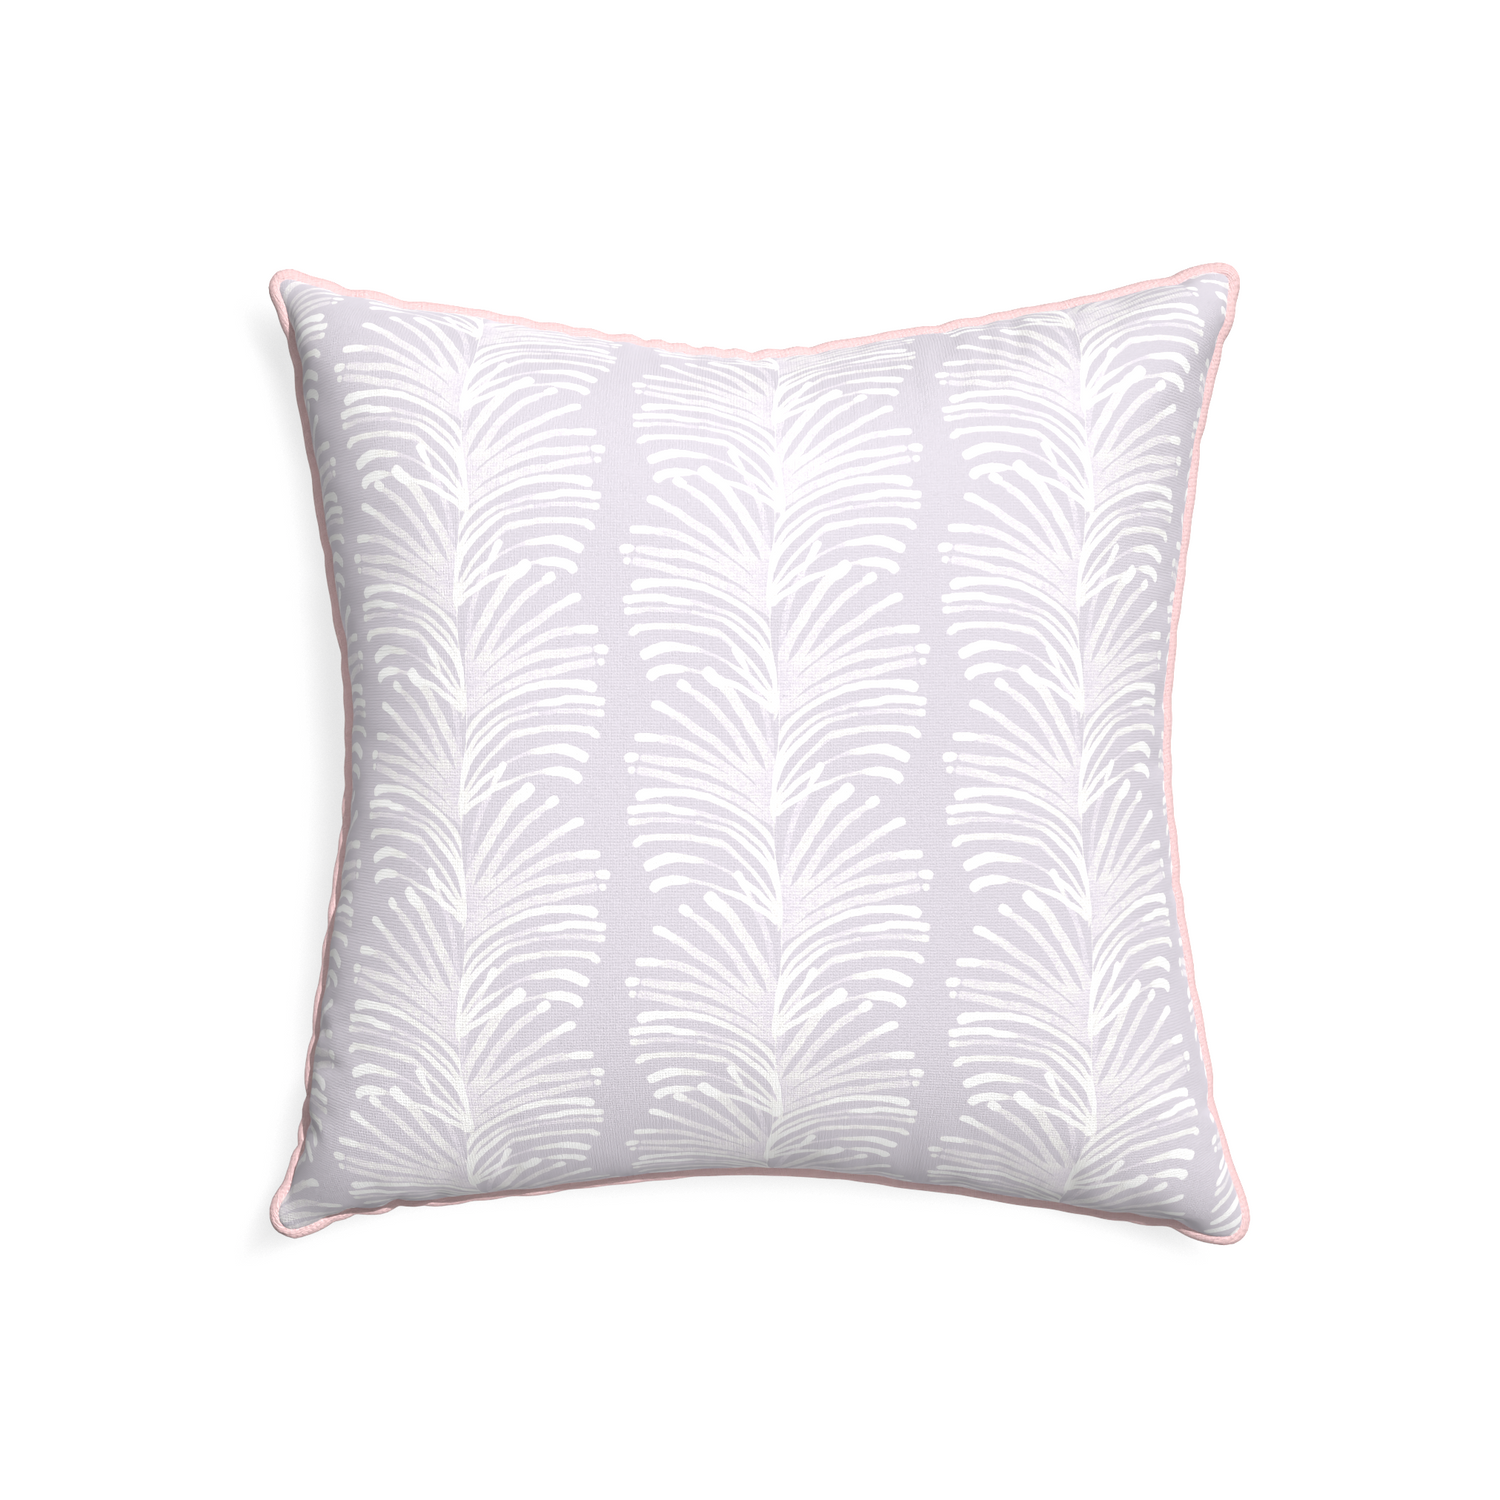 22-square emma lavender custom pillow with petal piping on white background